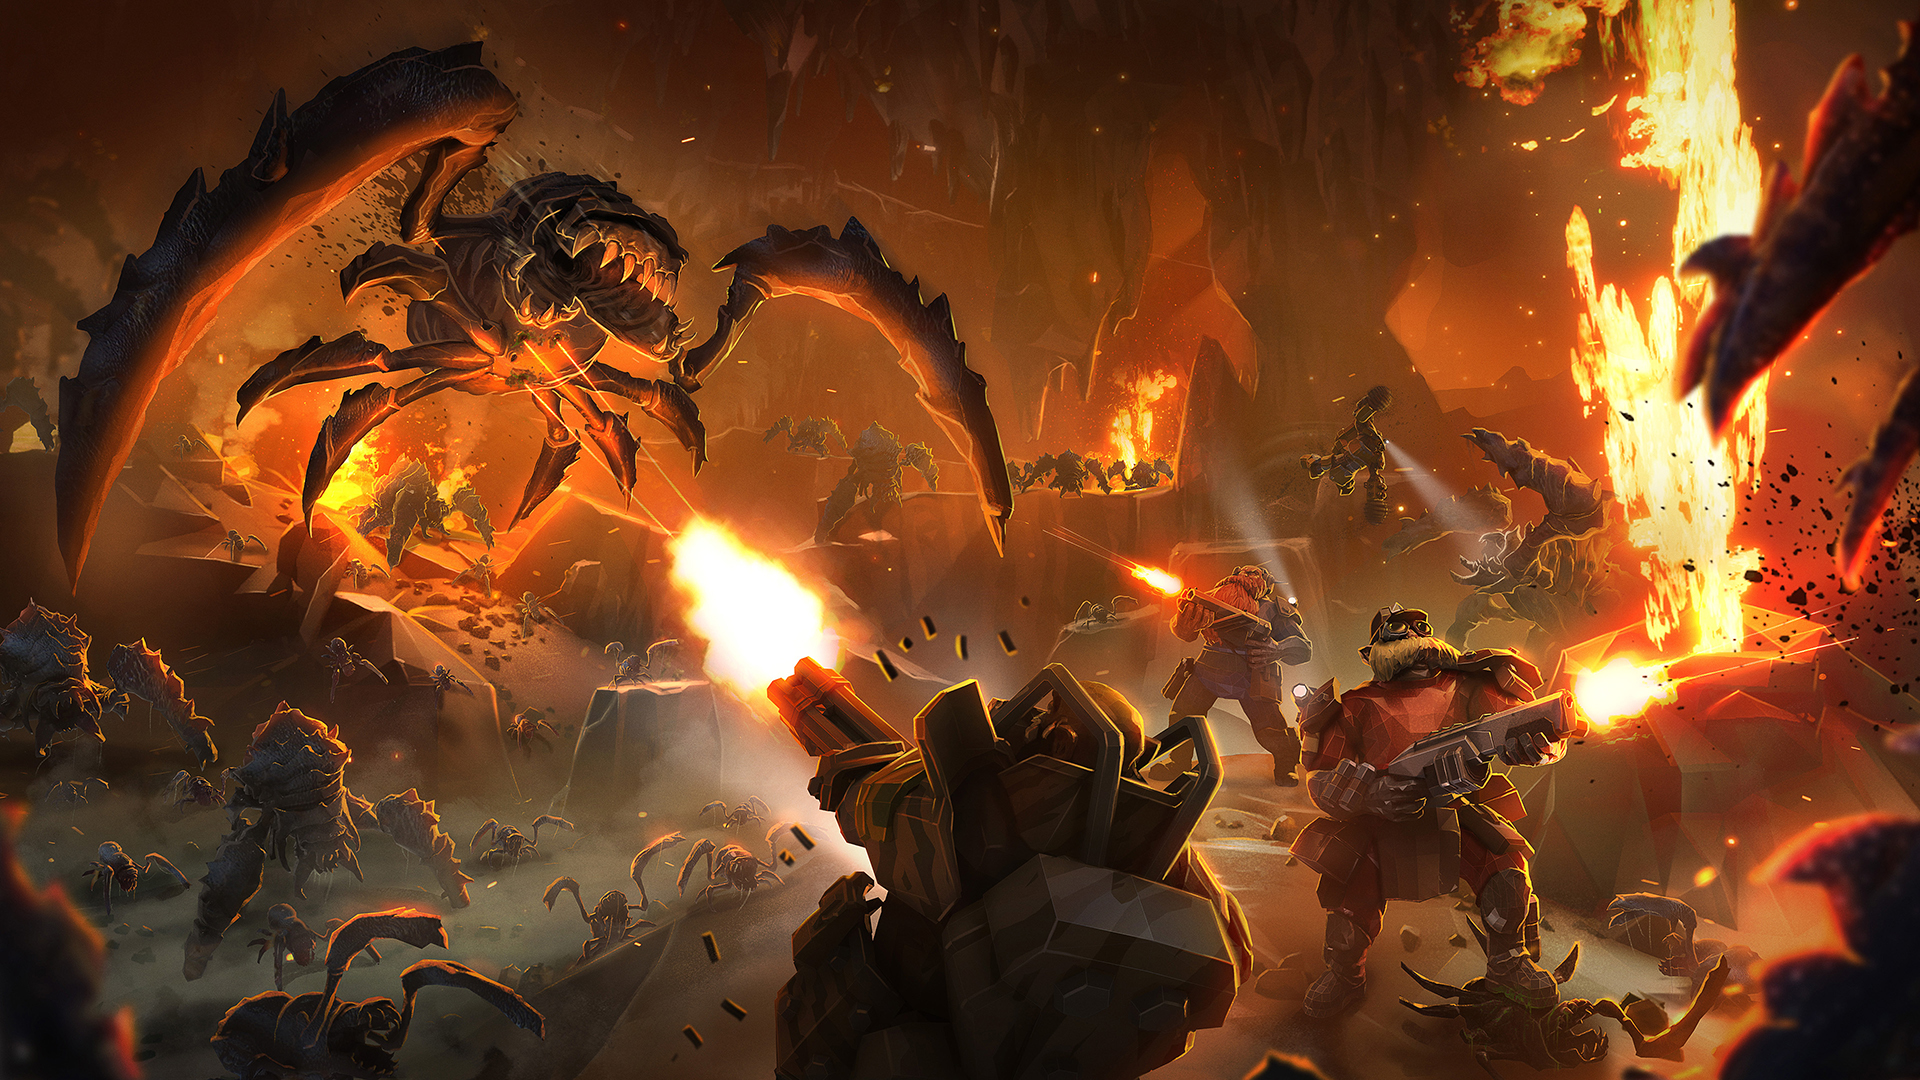 Dwarves fighting bugs in a magma biome in Deep Rock Galactic.